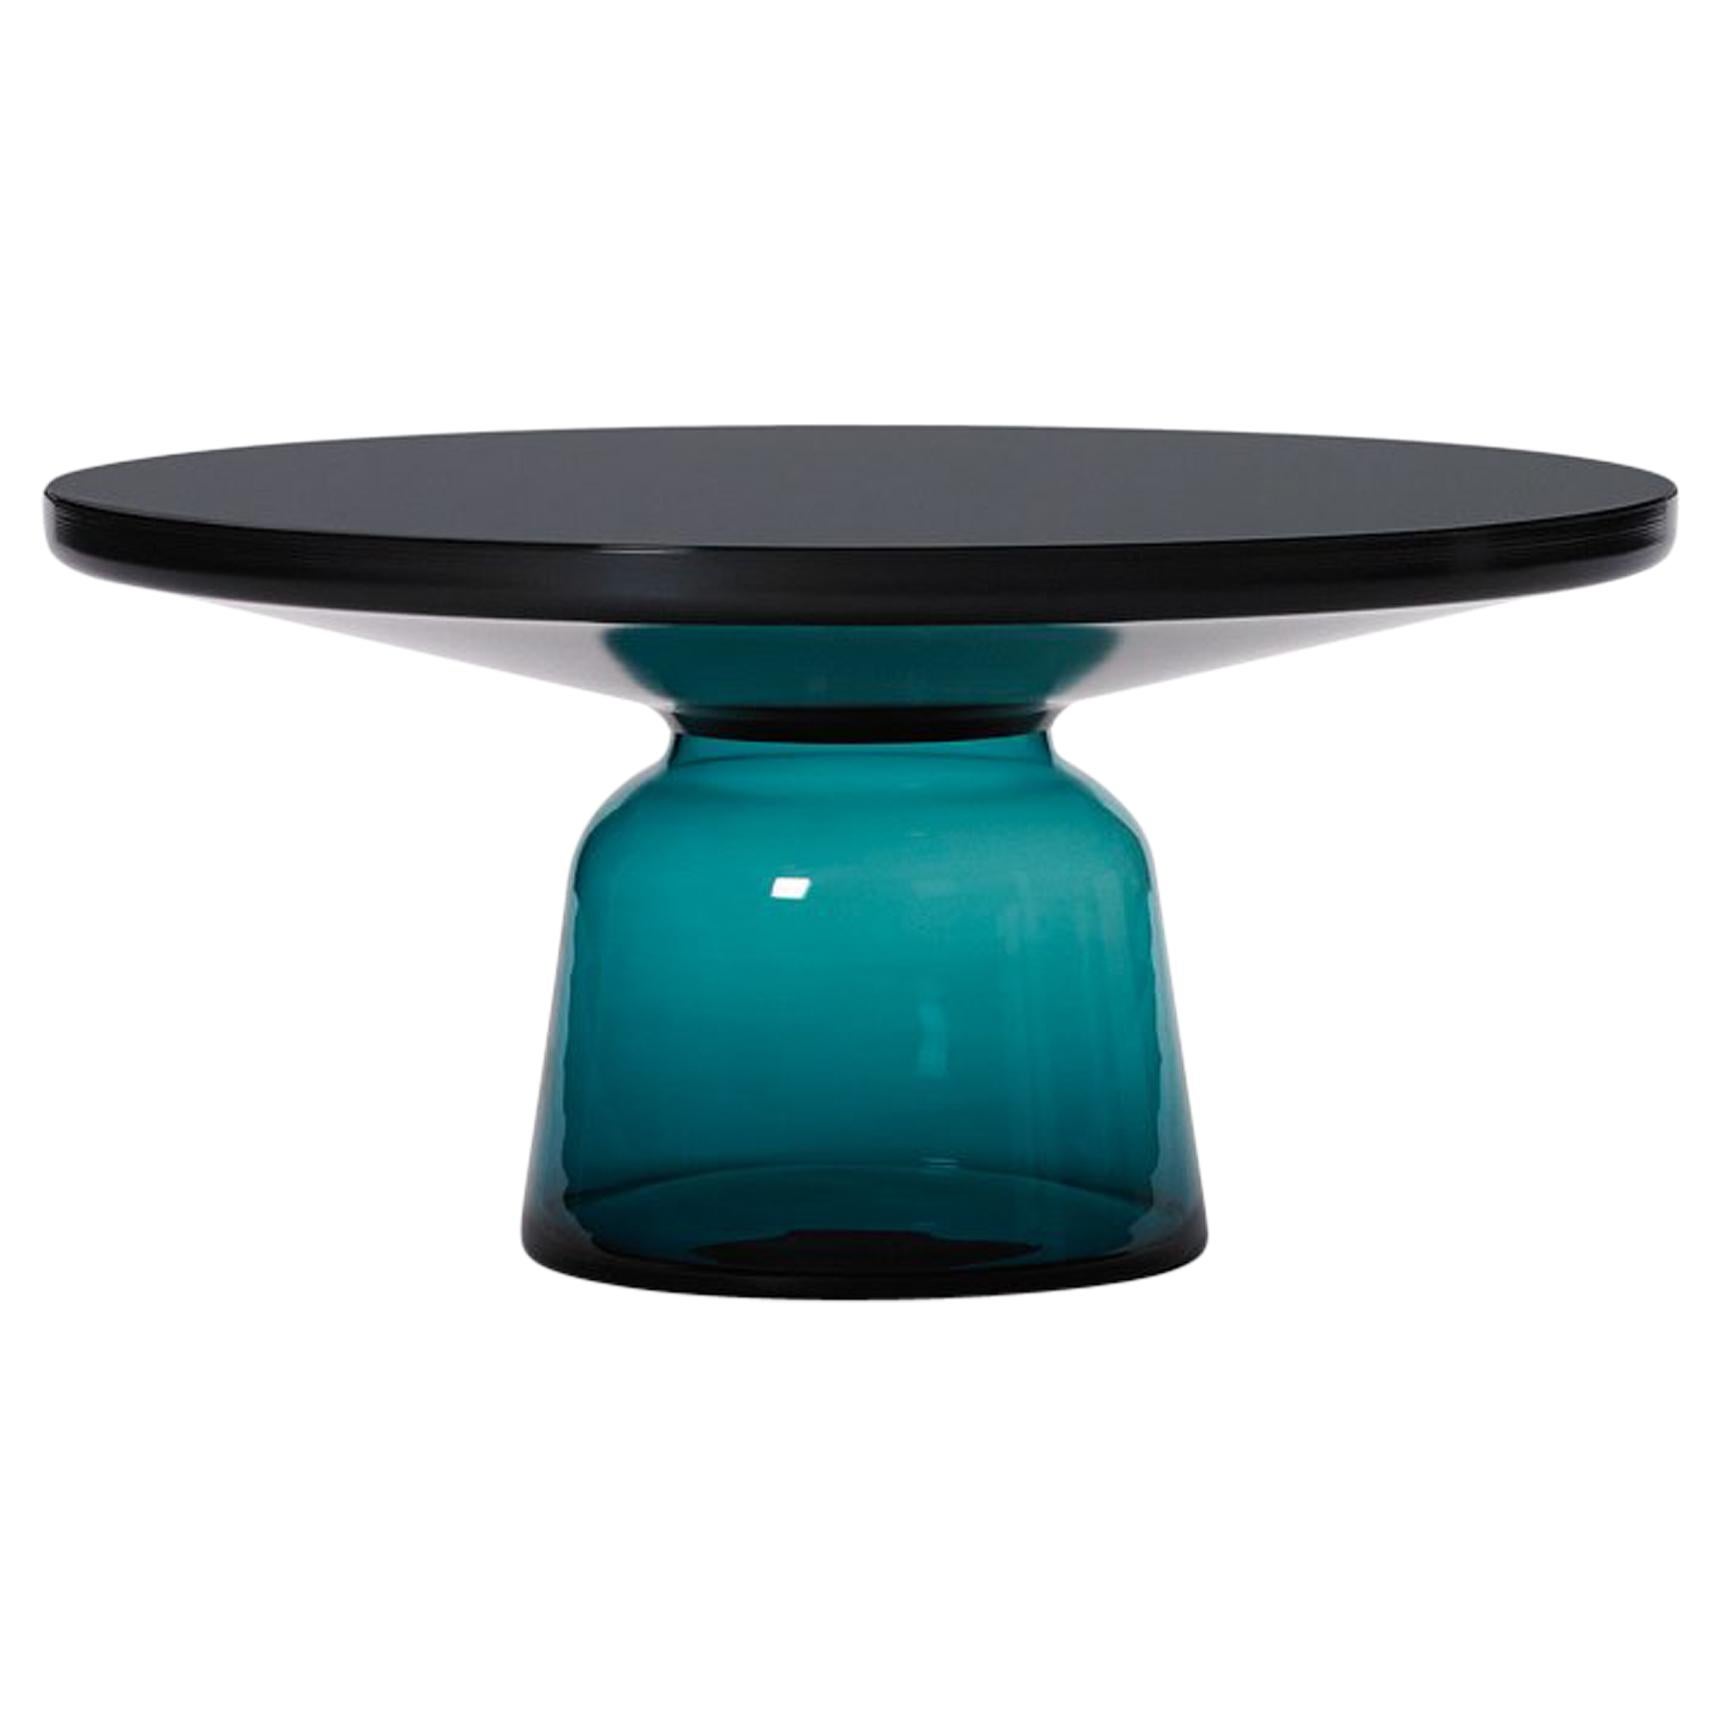 ClassiCon Bell Coffee Table in Black and Montana Blue by Sebastian Herkner